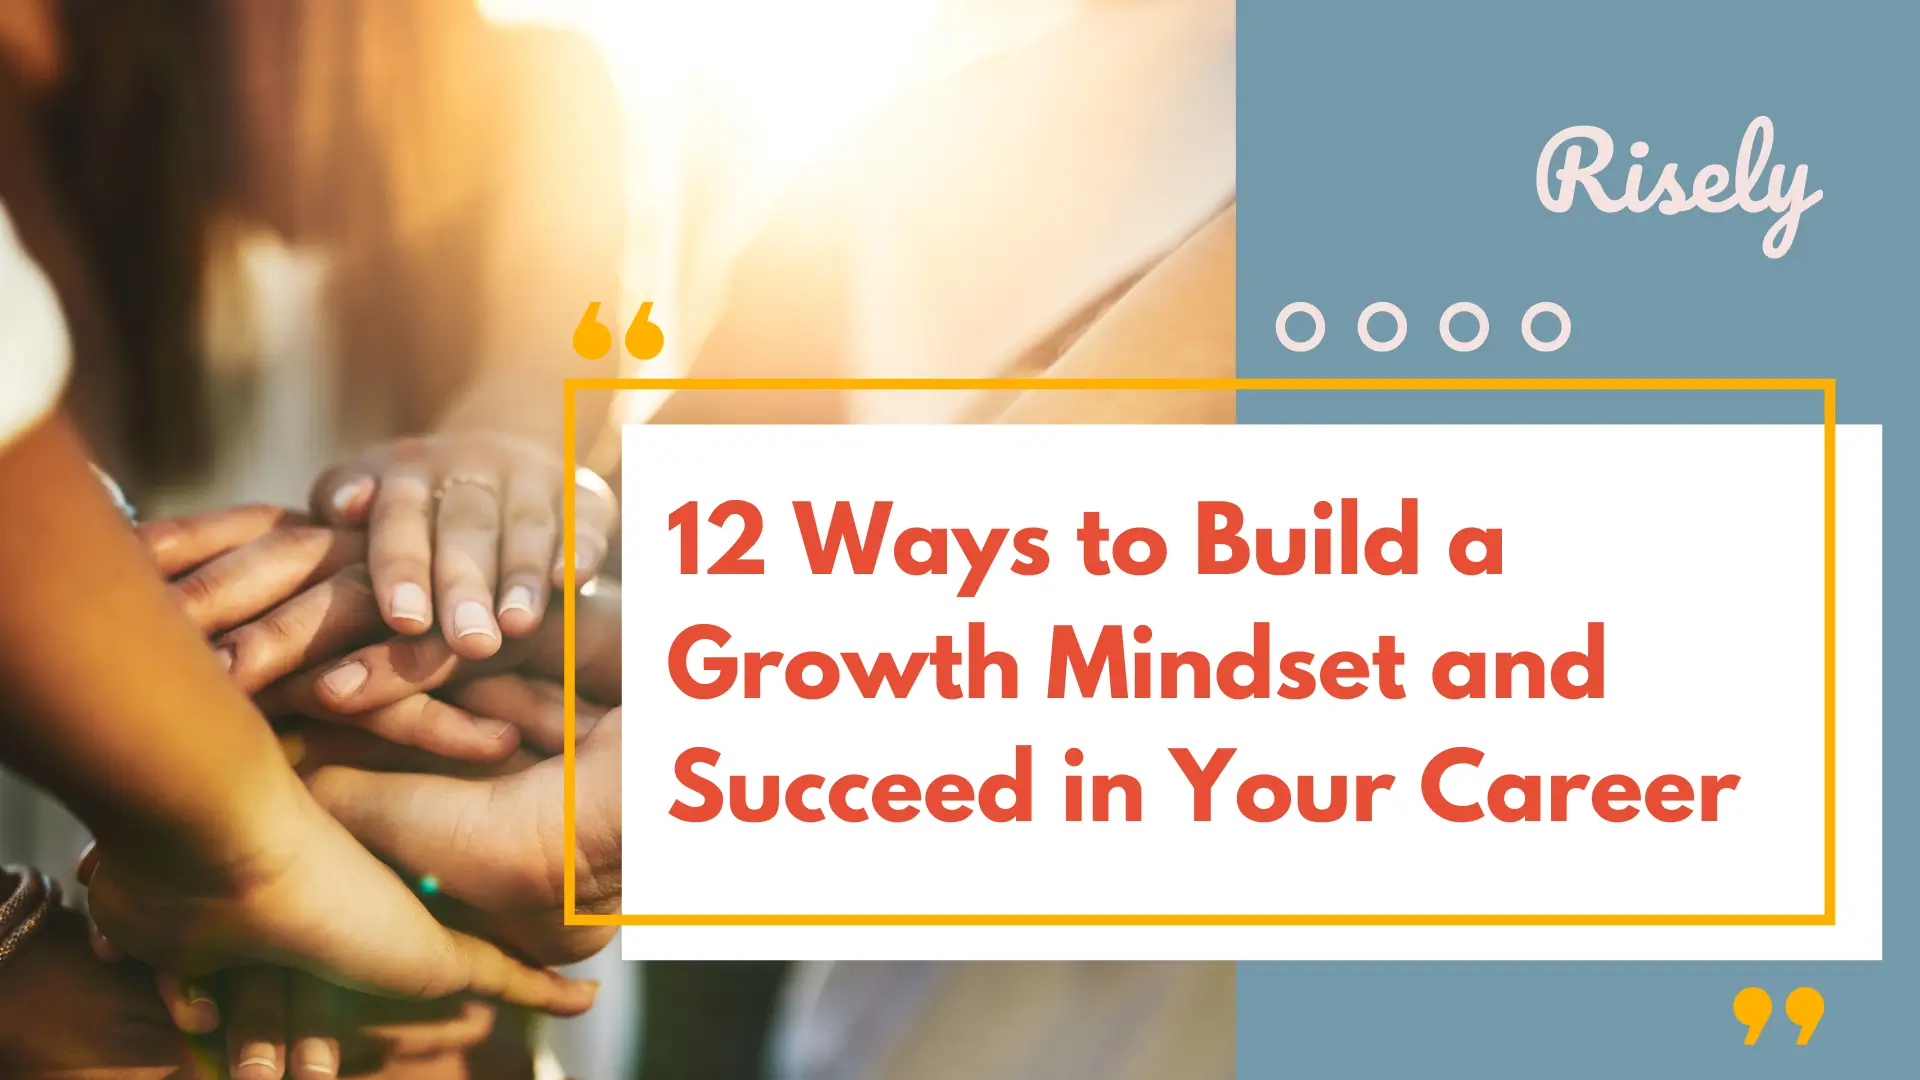 12 Ways to Build a Growth Mindset and Succeed in Your Career